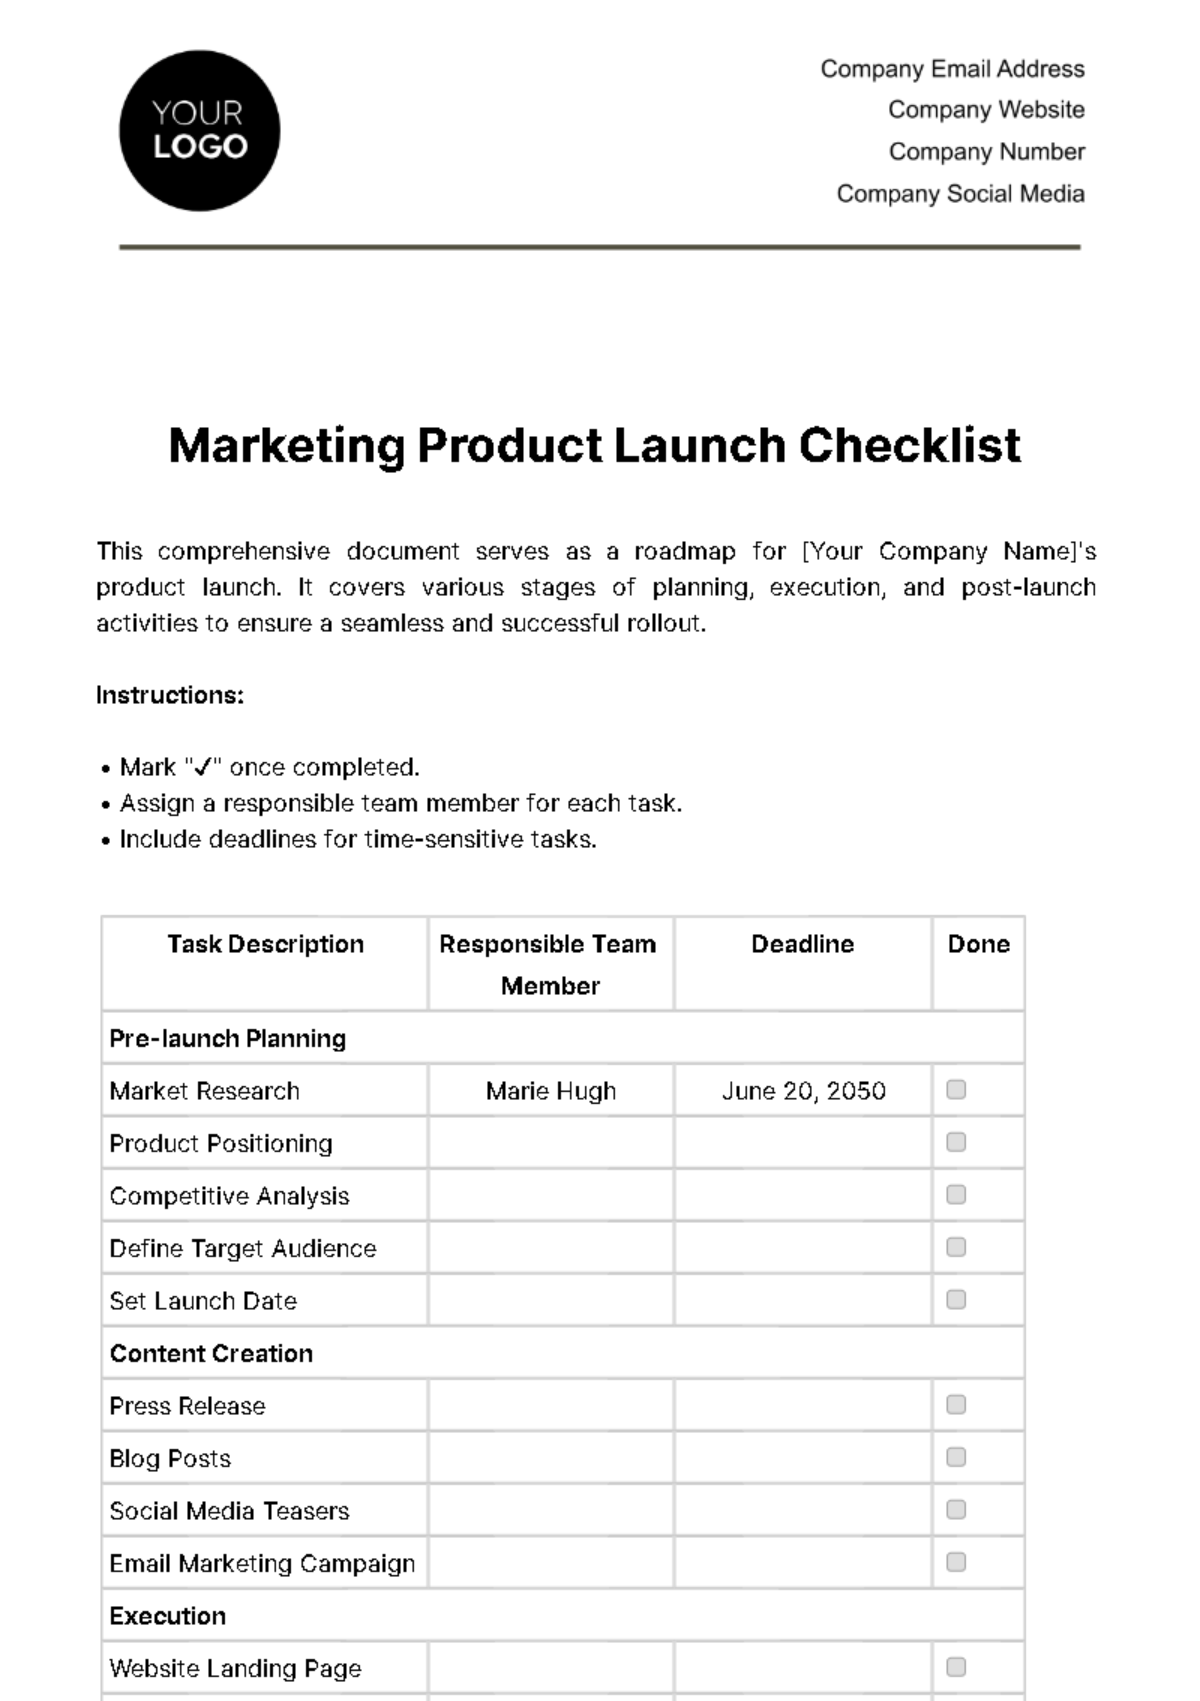 Marketing Product Launch Checklist Template